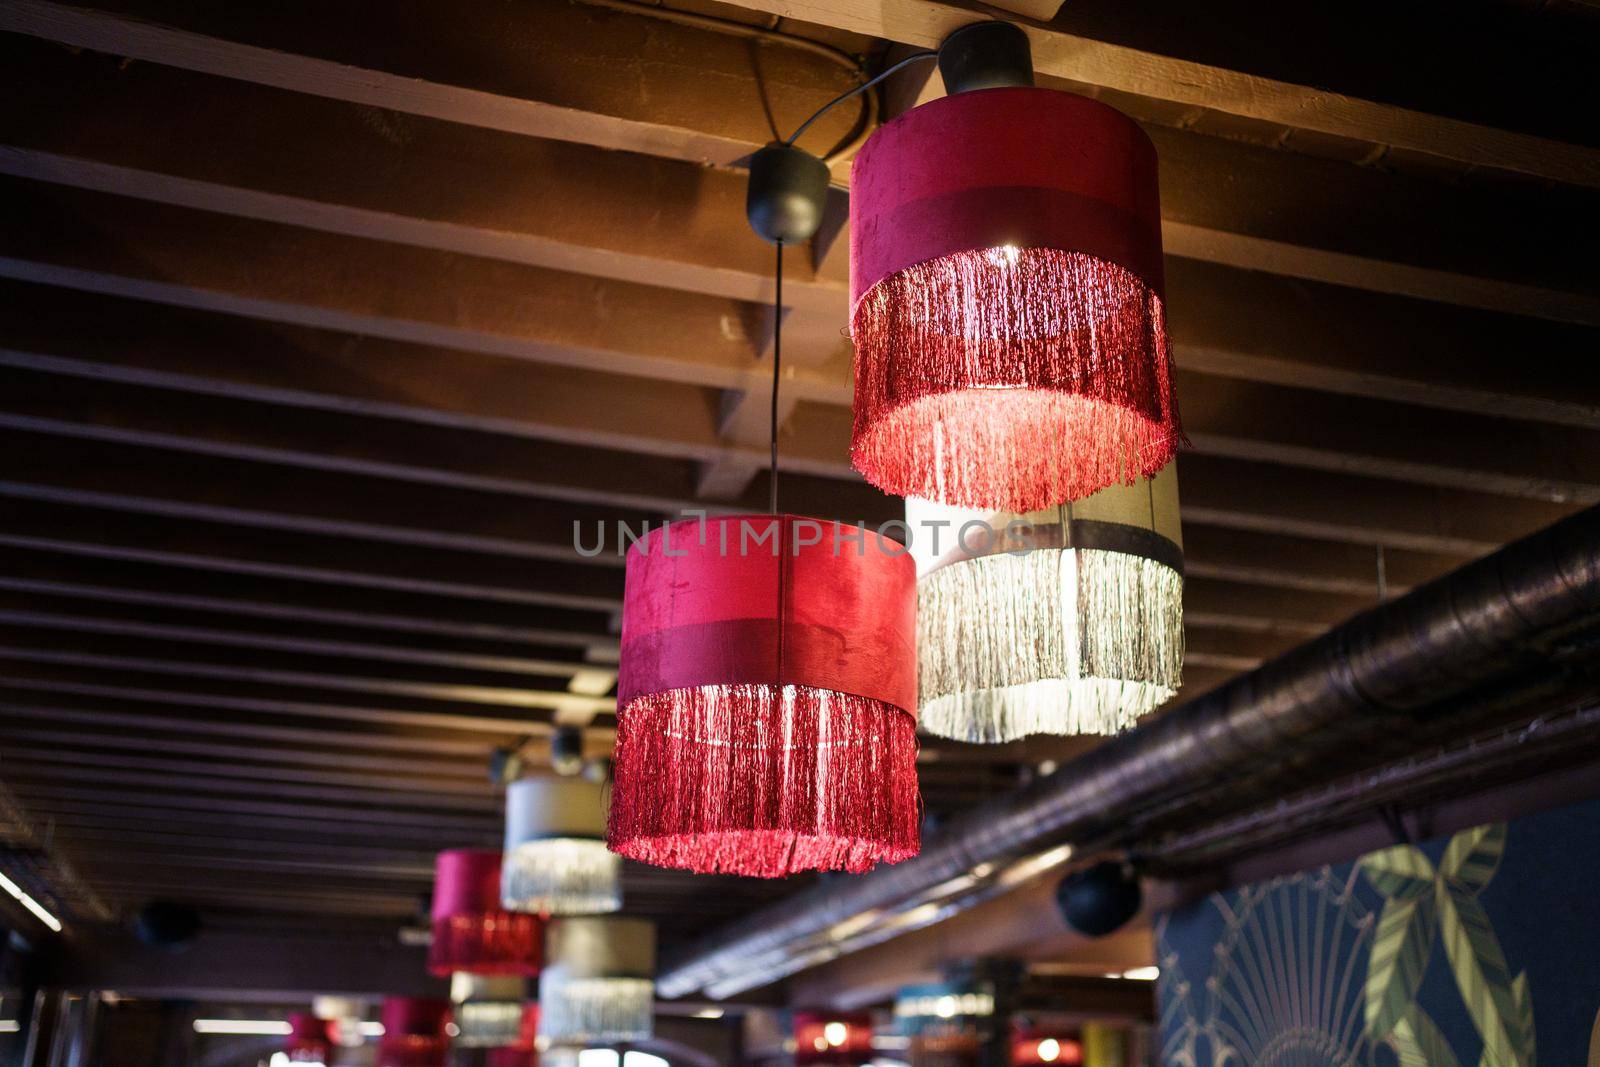 Interior of modern restaurant with chandeliers hanging from a wooden beam ceiling. by javiindy